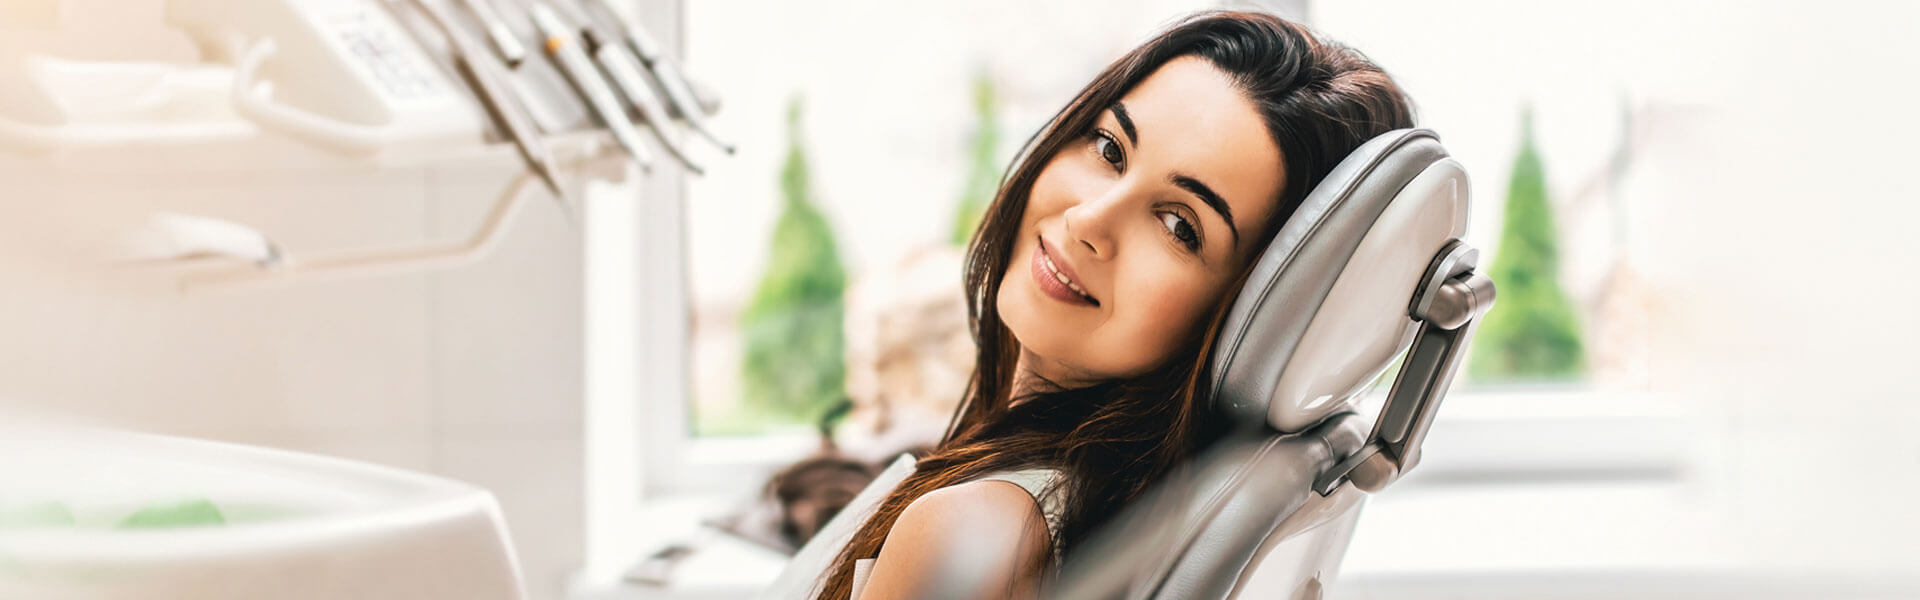 How Sedation Dentistry Can Help You Relax in the Dentist’s Chair